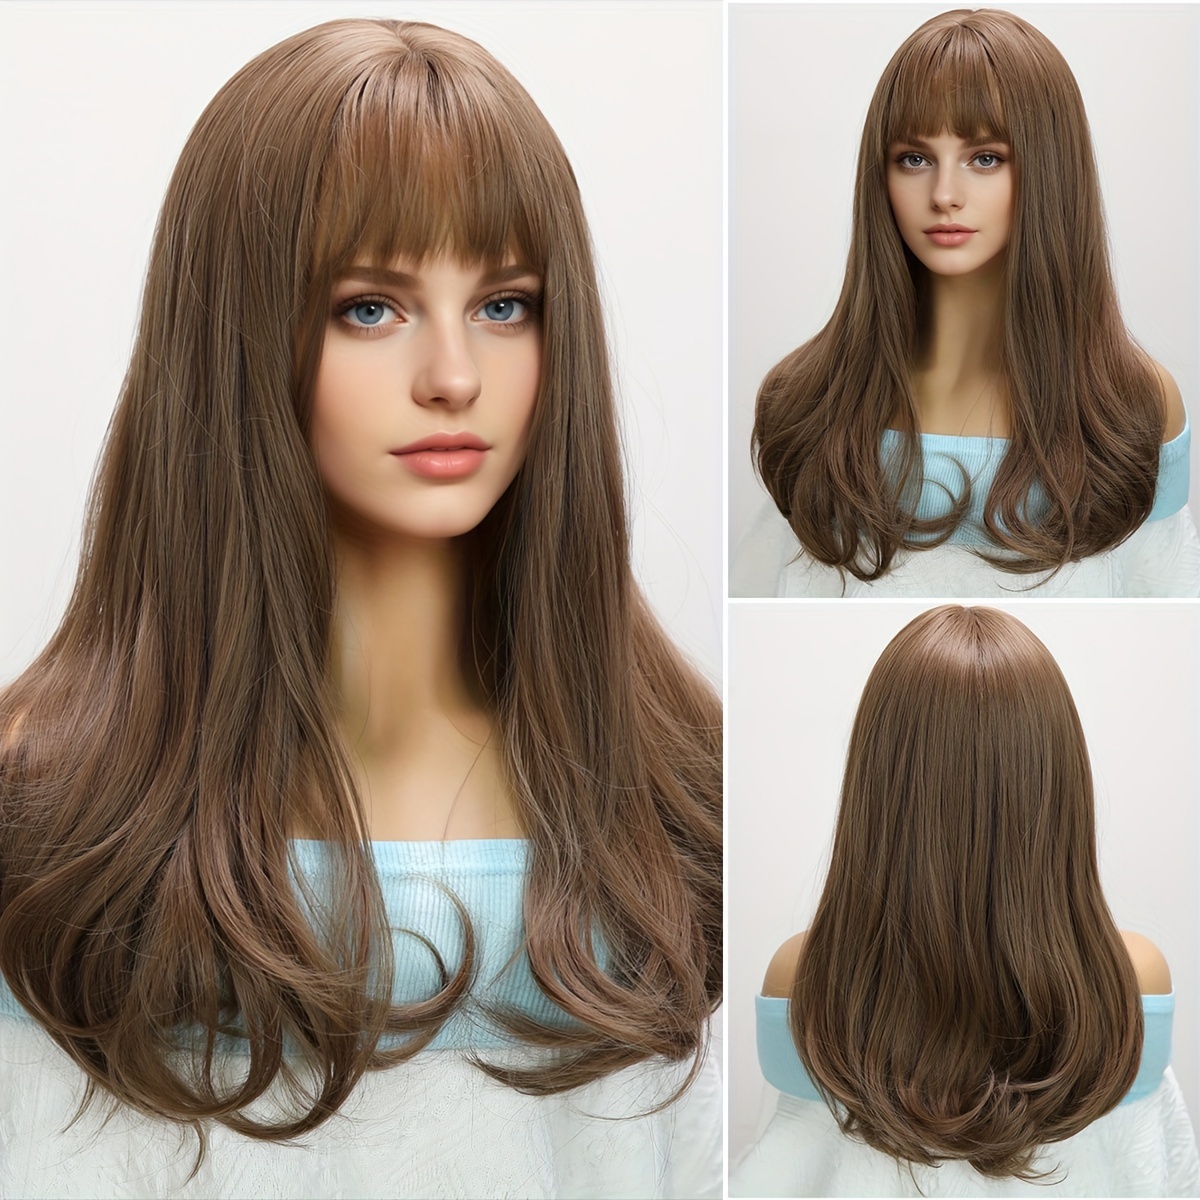 

Exquisite Synthetic Wig - High-quality Synthetic Hair With Vibrant Colors And Natural Appearance, Suitable For Daily Fashion And Role-playing (20 Inches)